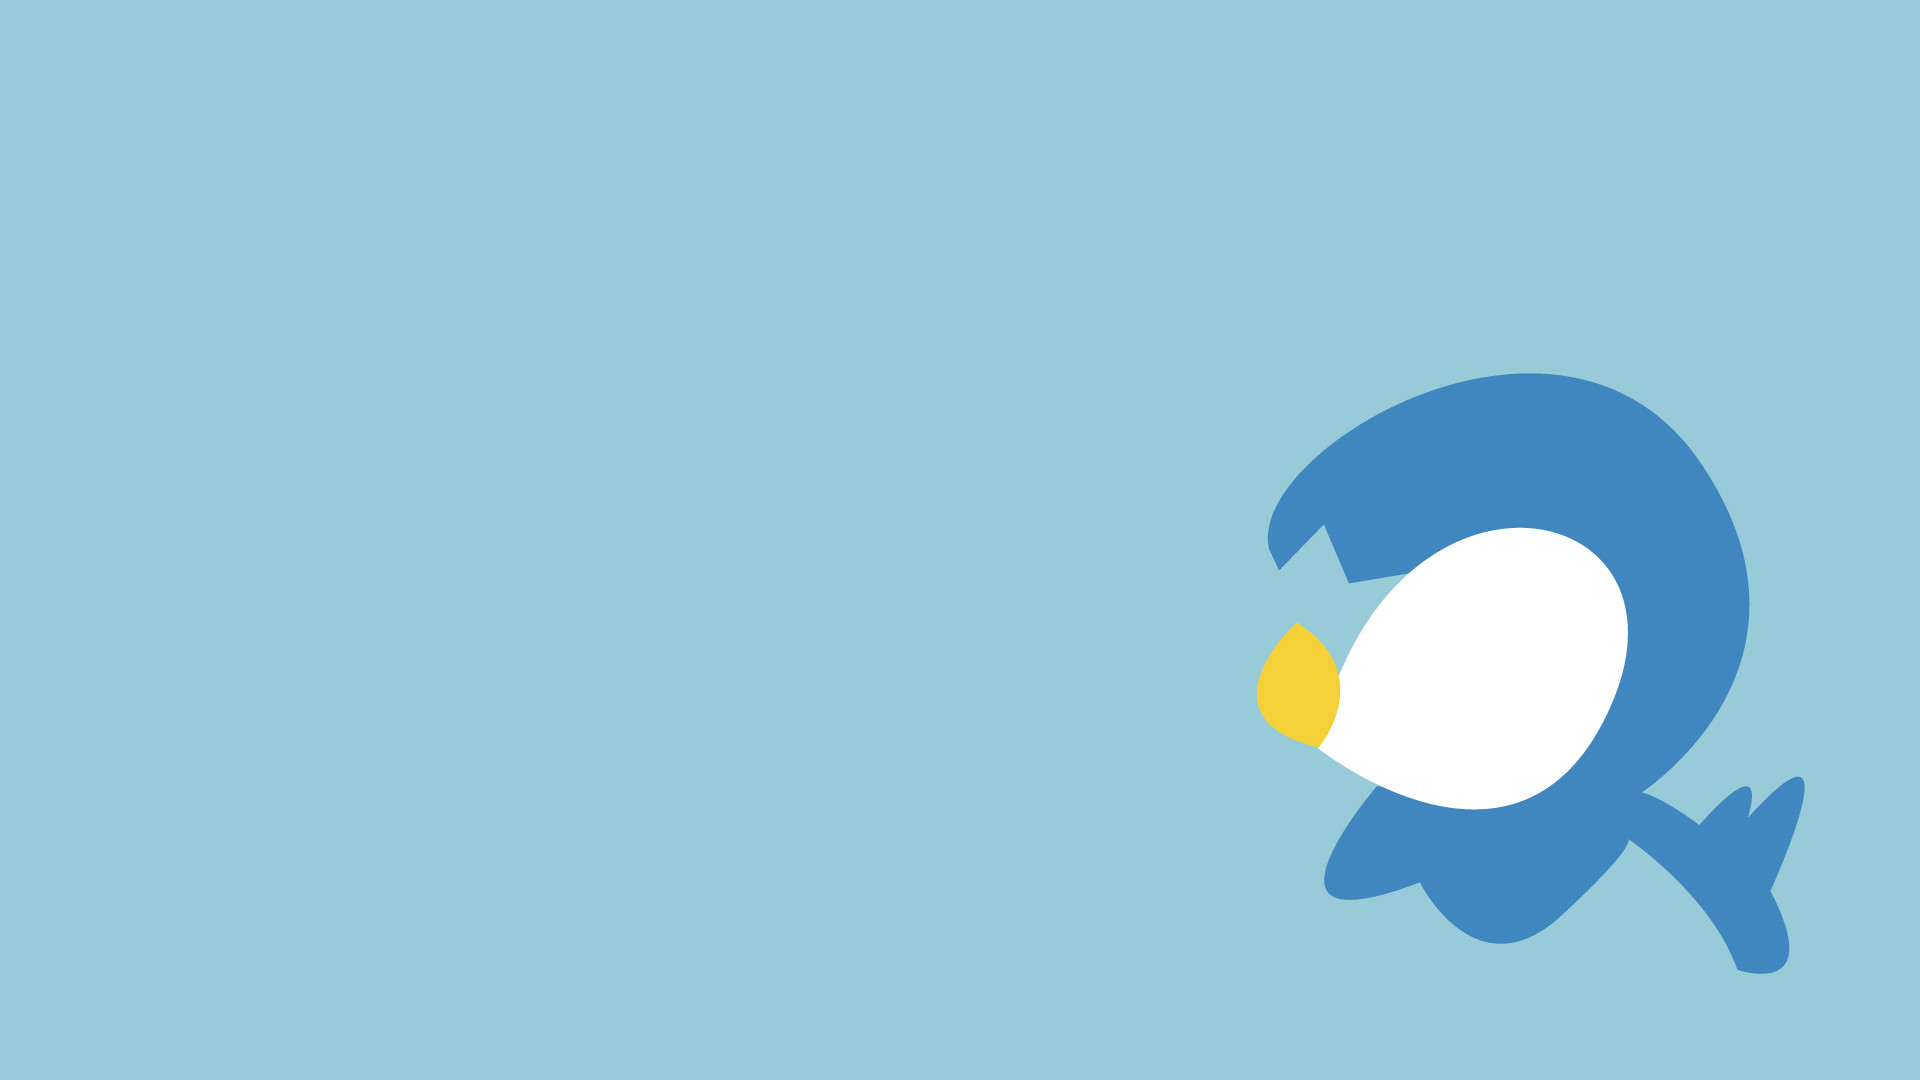 1920x1080 piplupfan1 images Piplupfan1's Fave Picks HD wallpaper and background photos